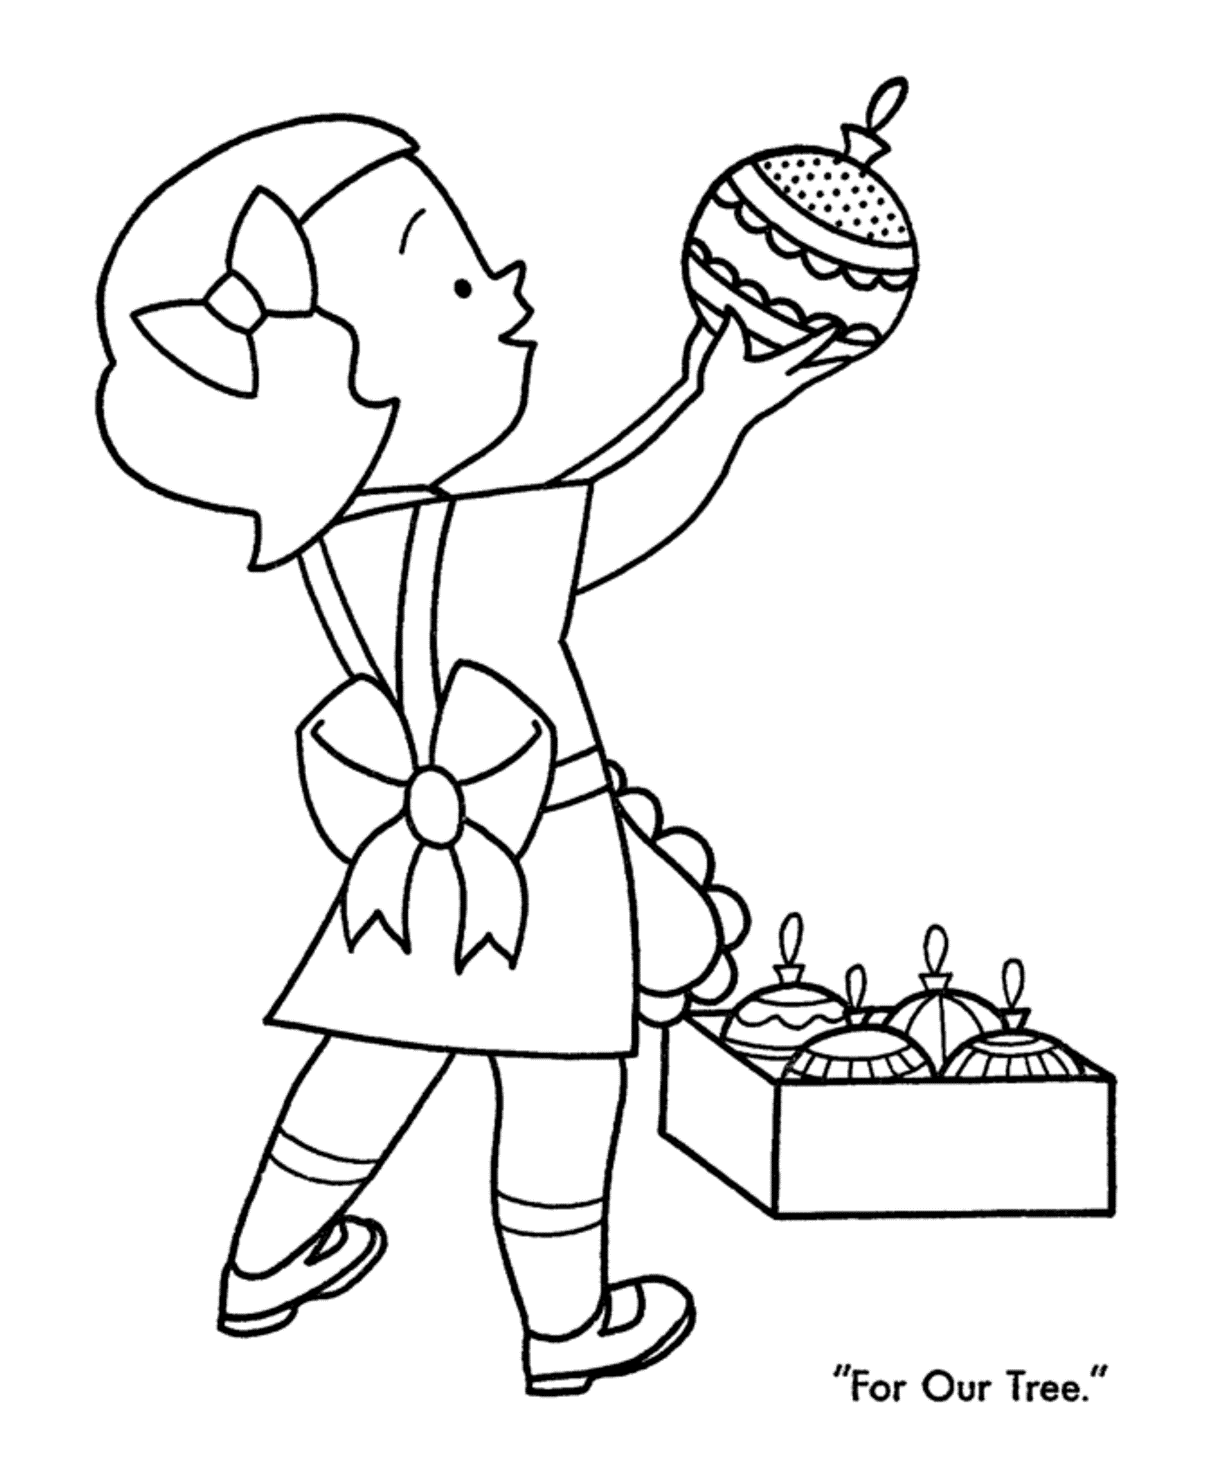 Little Girl With Ornaments For Christmas Coloring Page | Christmas ...